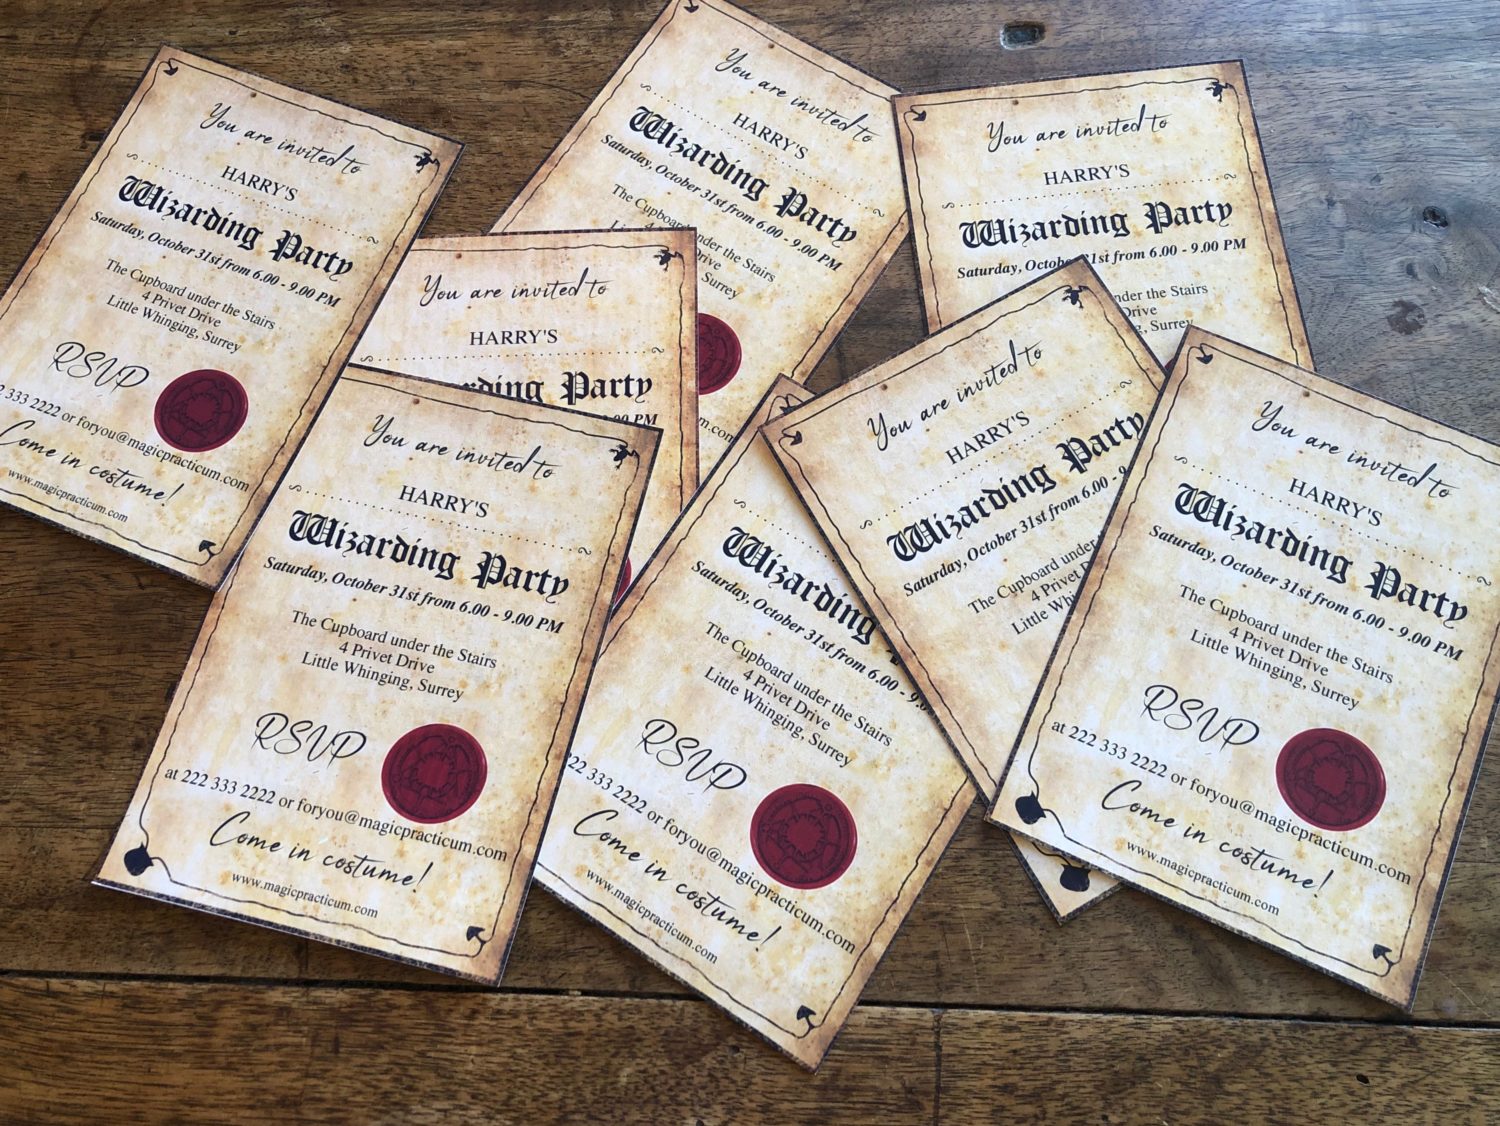 many vintage looking Harry Potter party invitations on the old table